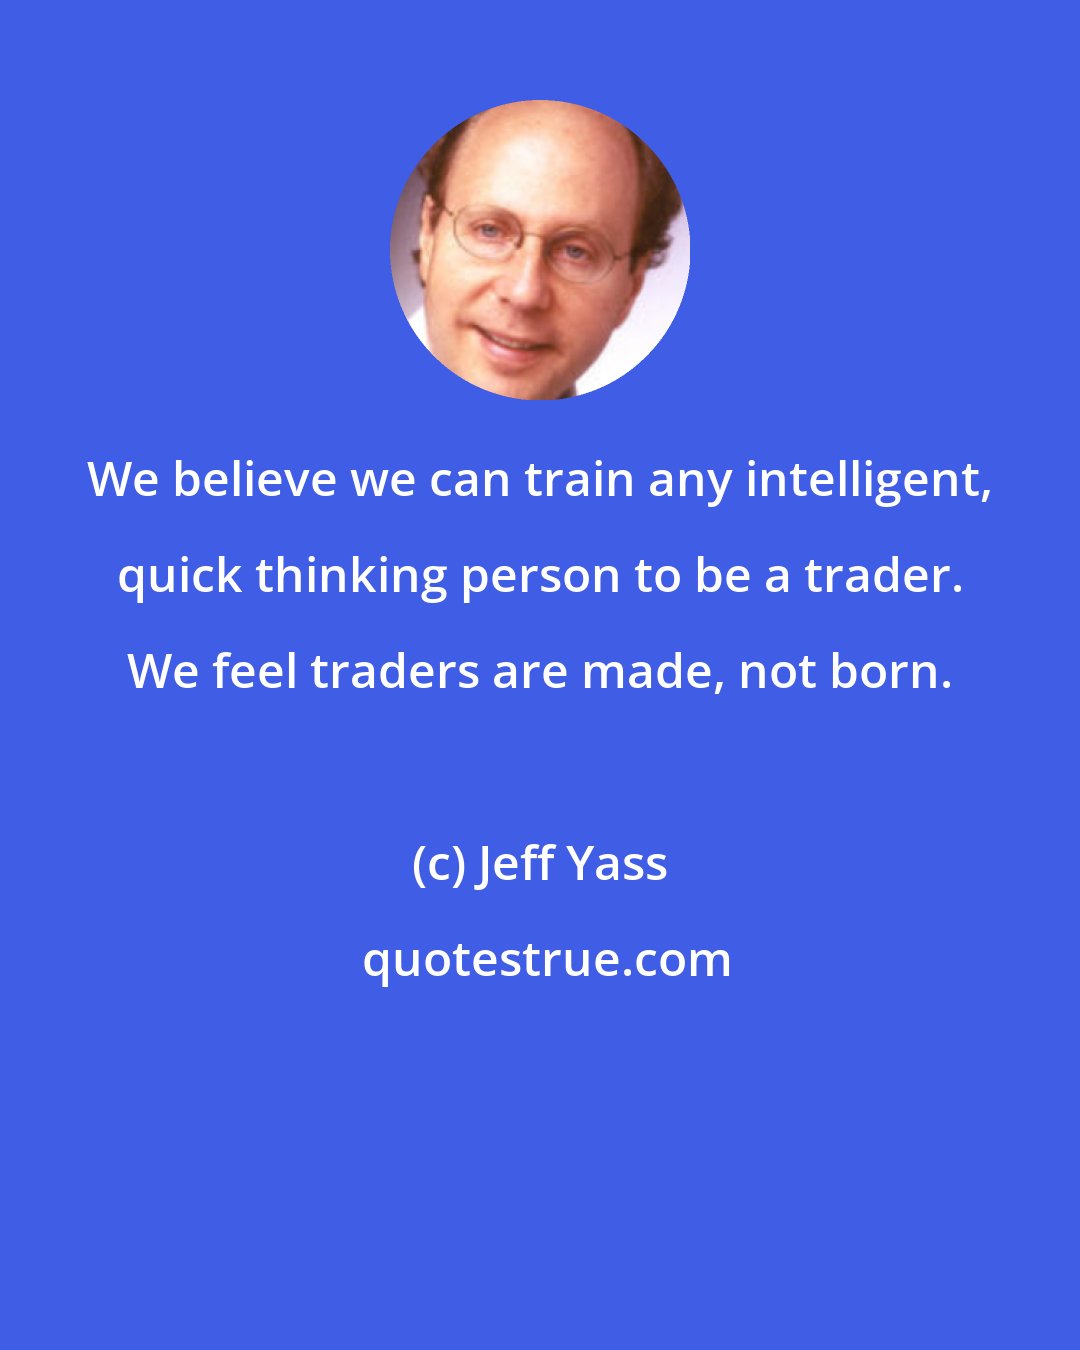 Jeff Yass: We believe we can train any intelligent, quick thinking person to be a trader. We feel traders are made, not born.